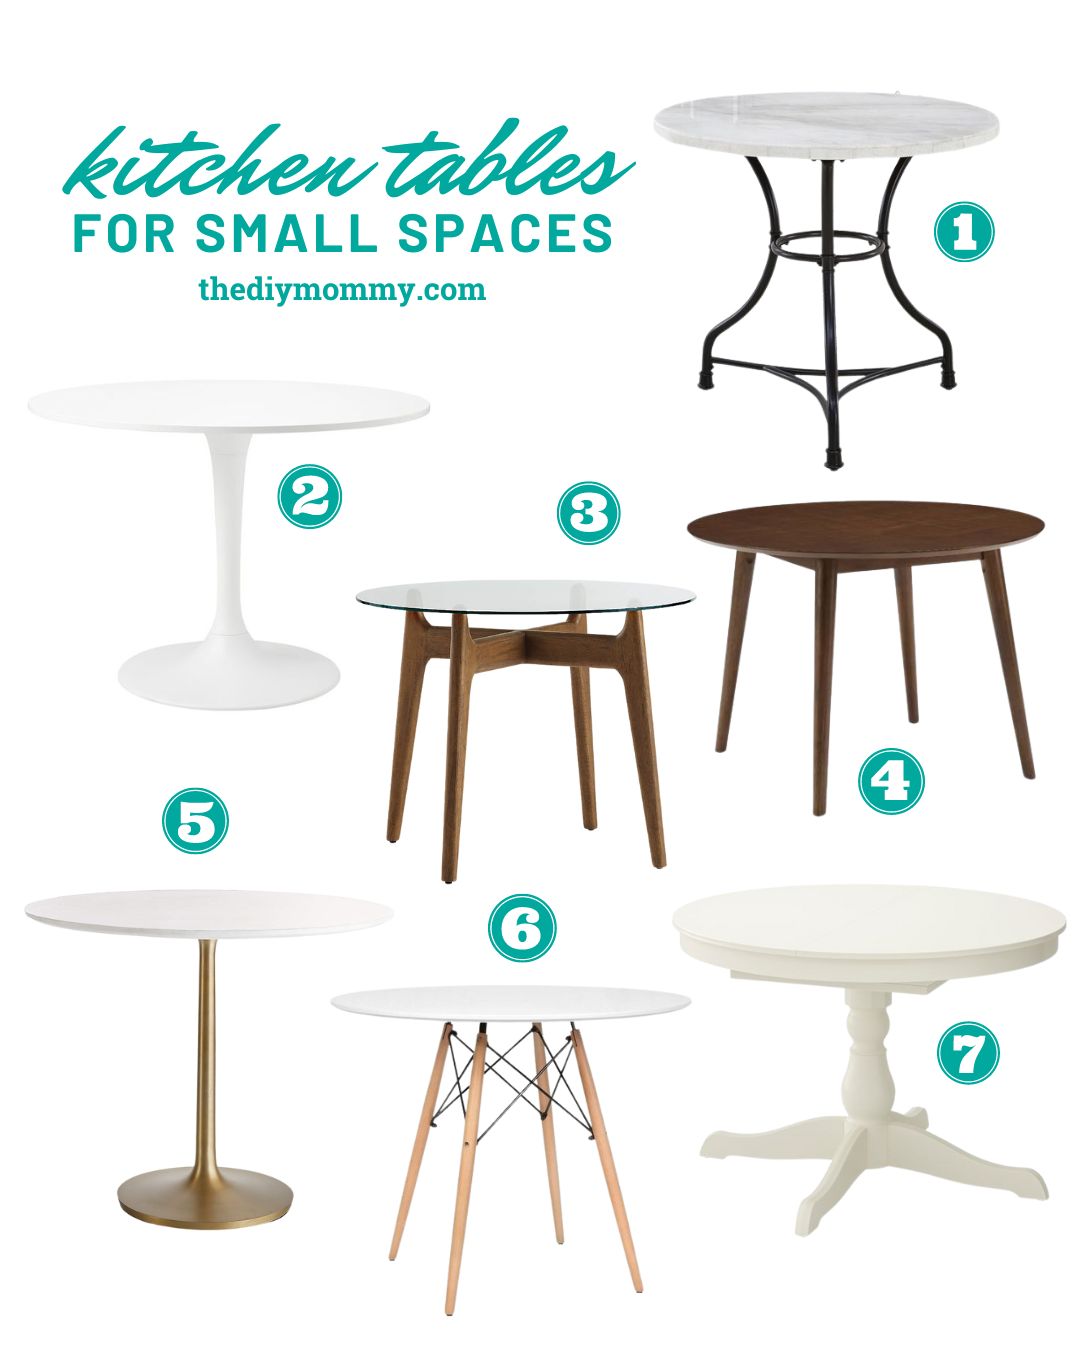 The best kitchen tables for small spaces